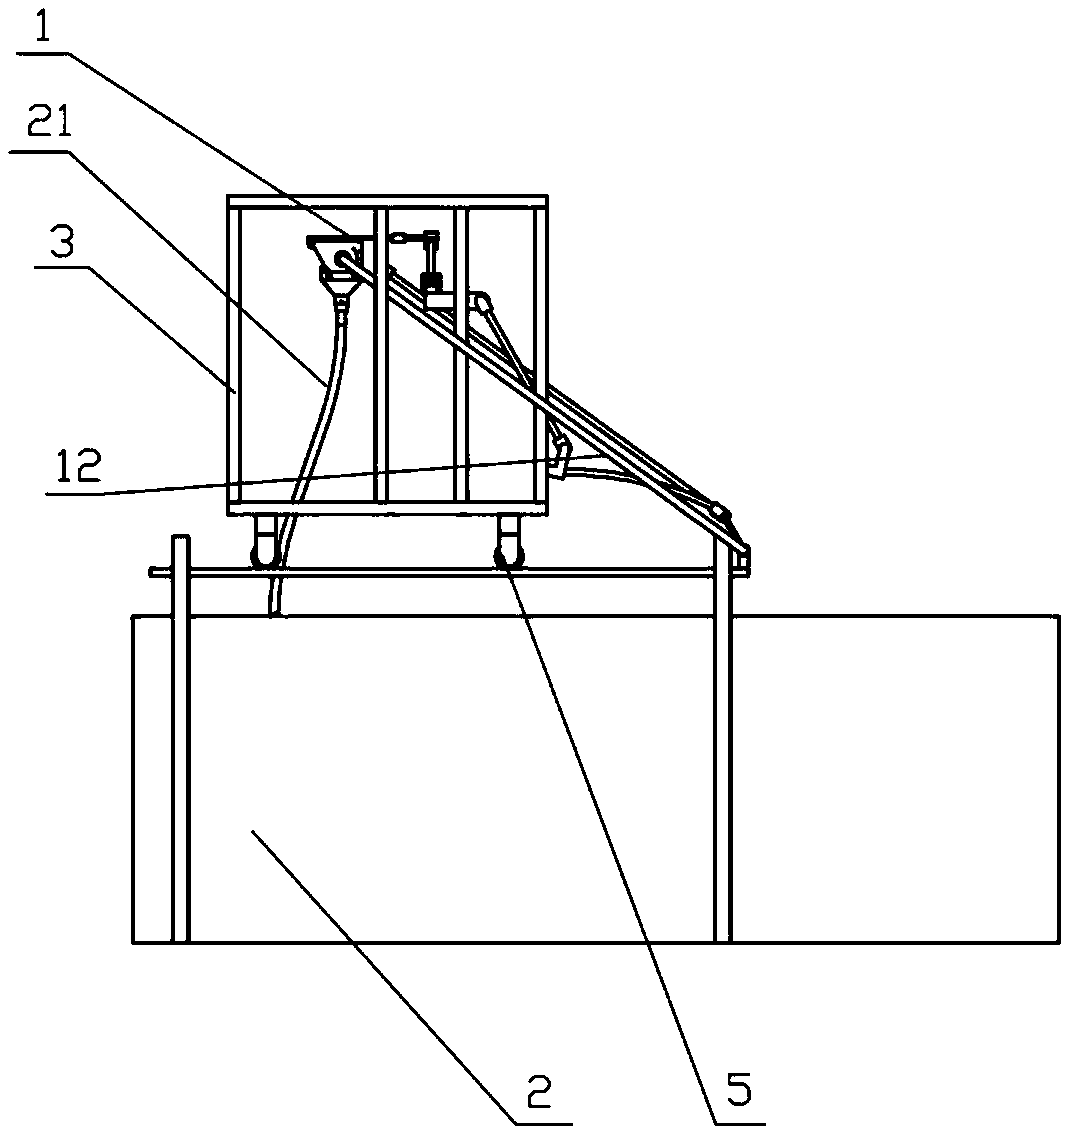 Seeding device for simulating field vibration working environment in laboratory